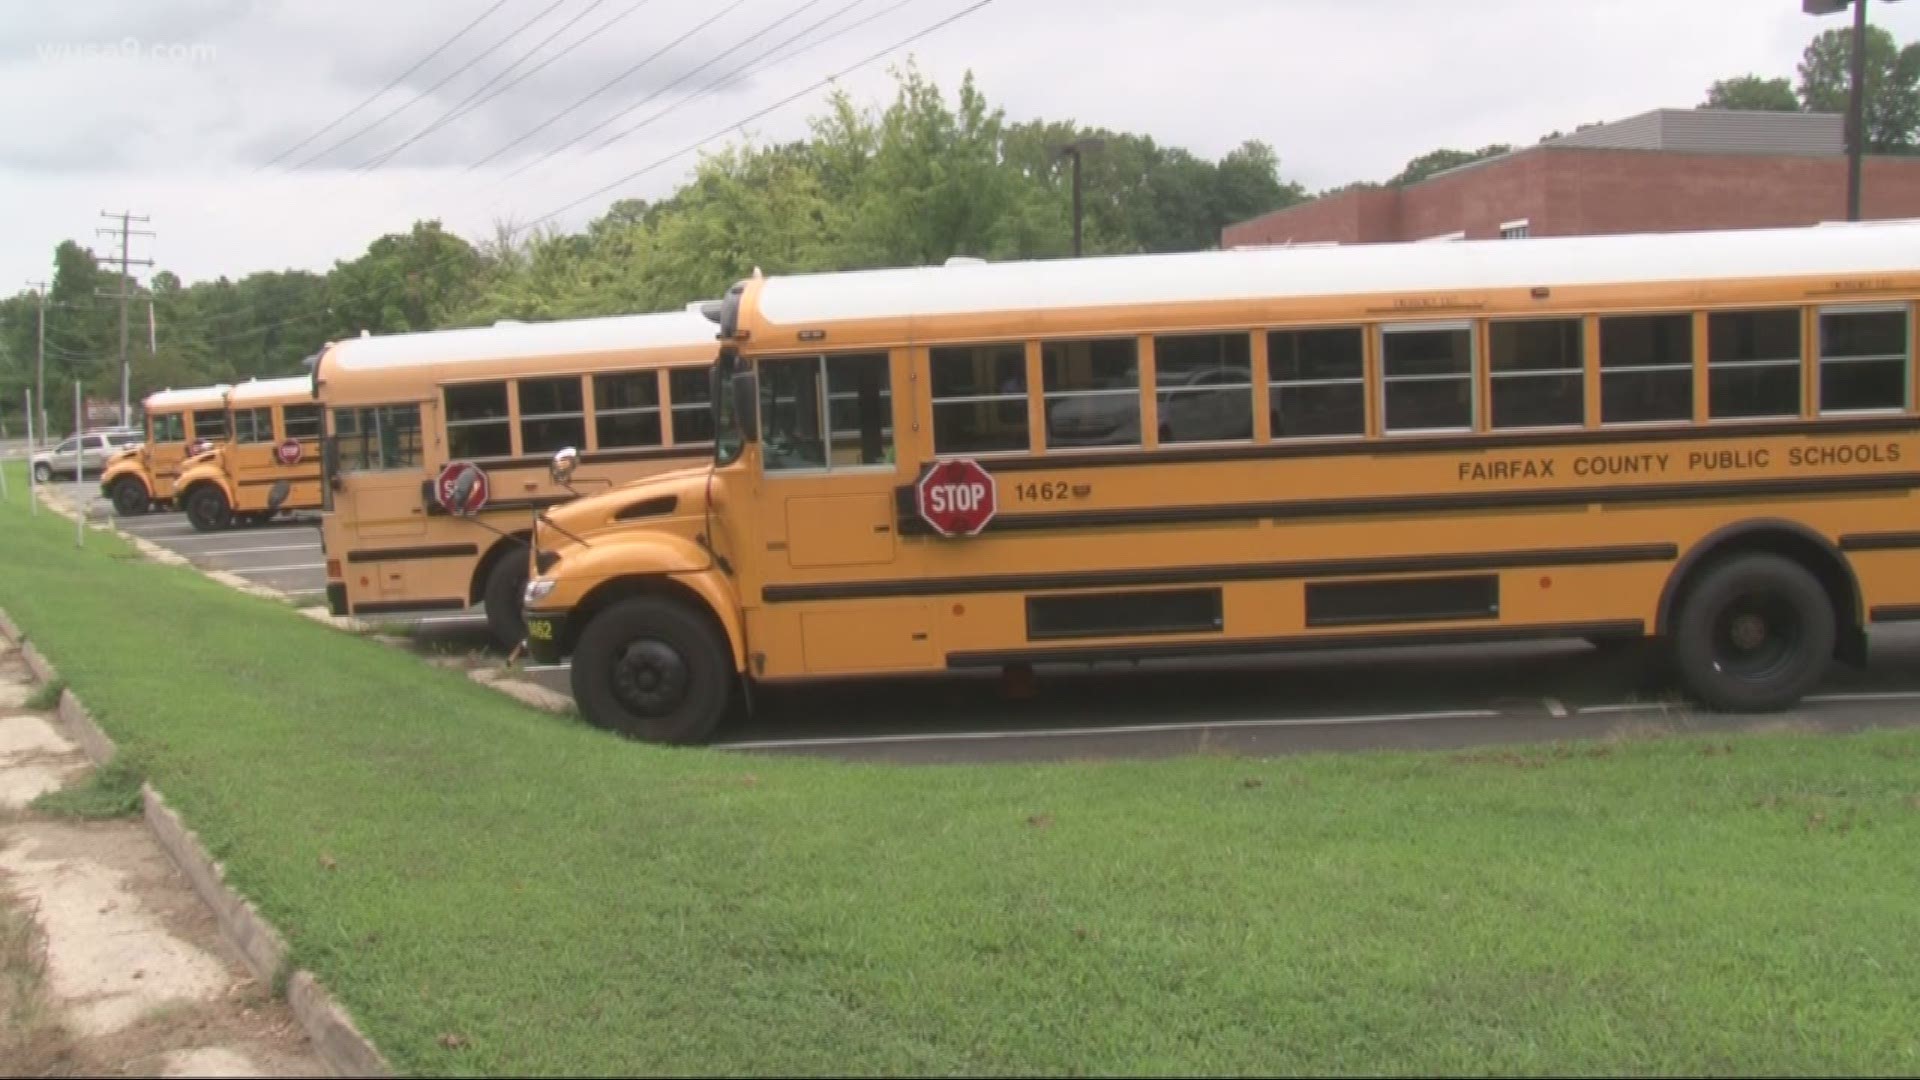 One of the largest school bus fleets in the country is in our backyard, and soon it could be battery powered.